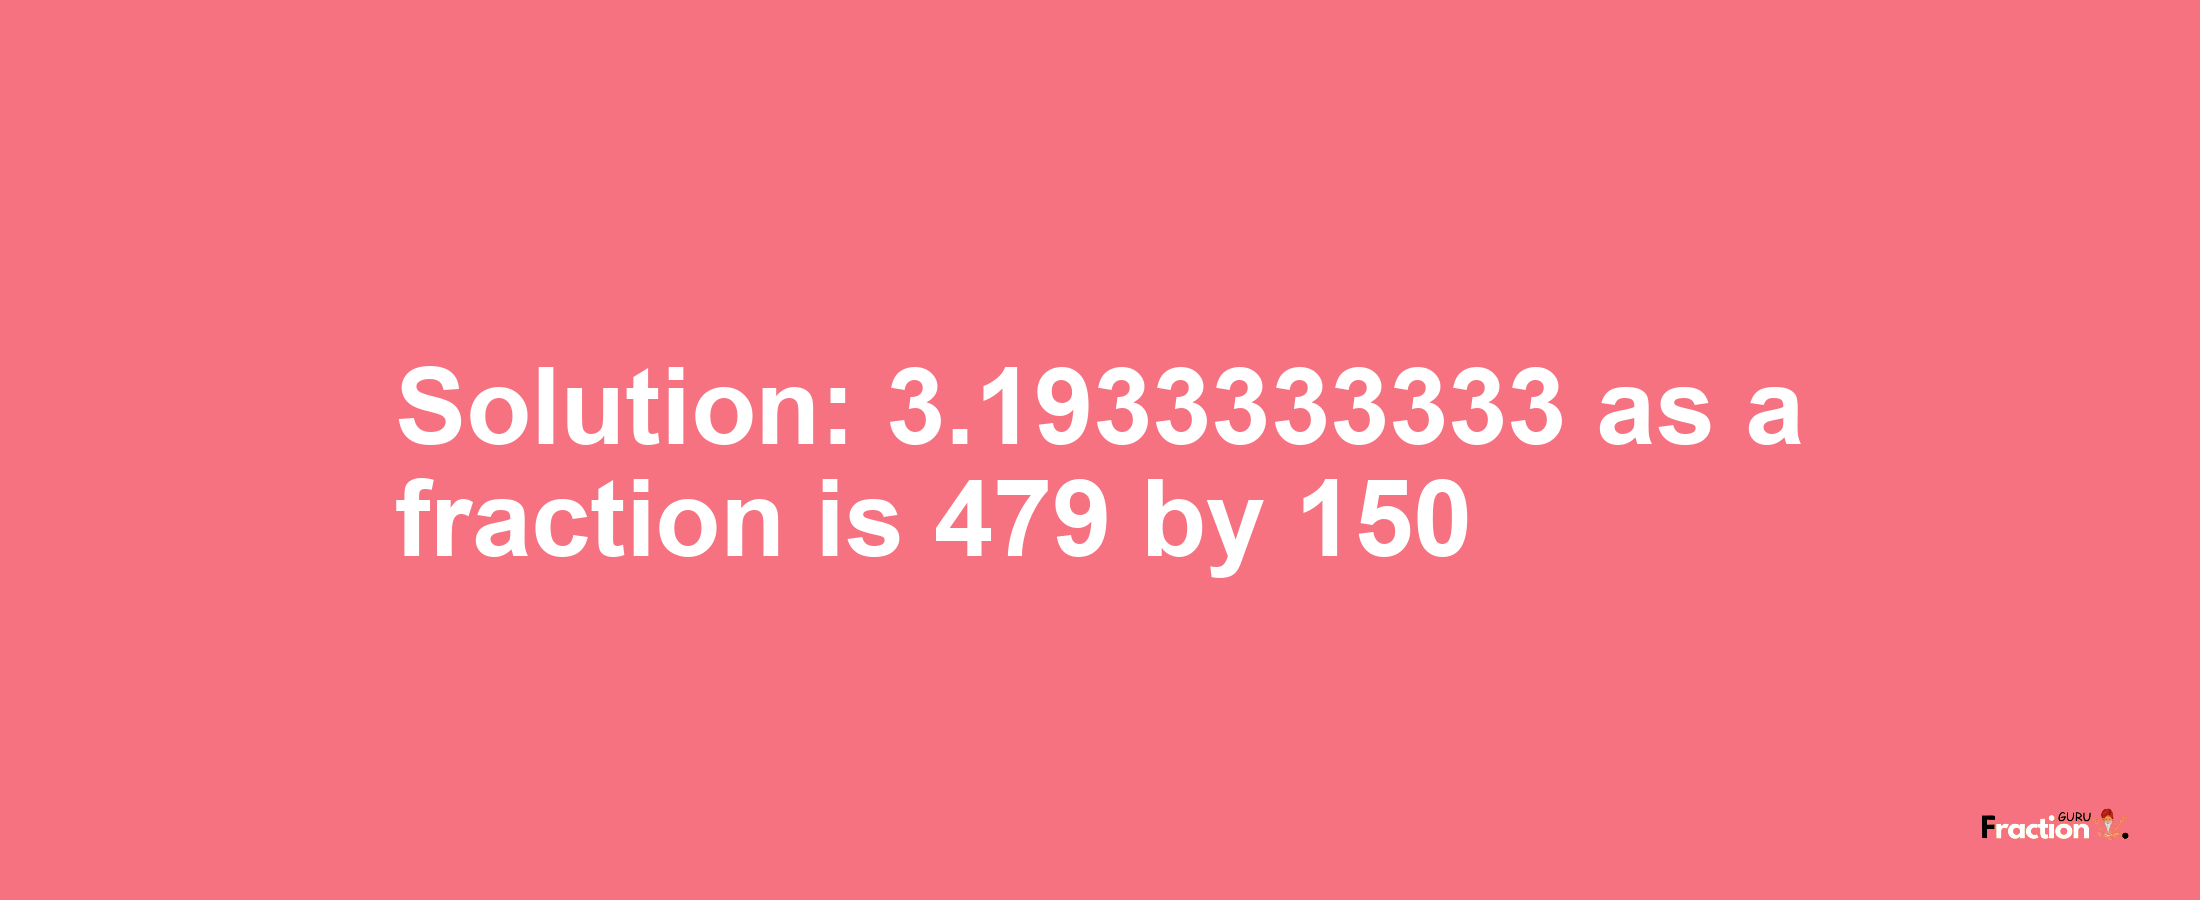 Solution:3.1933333333 as a fraction is 479/150